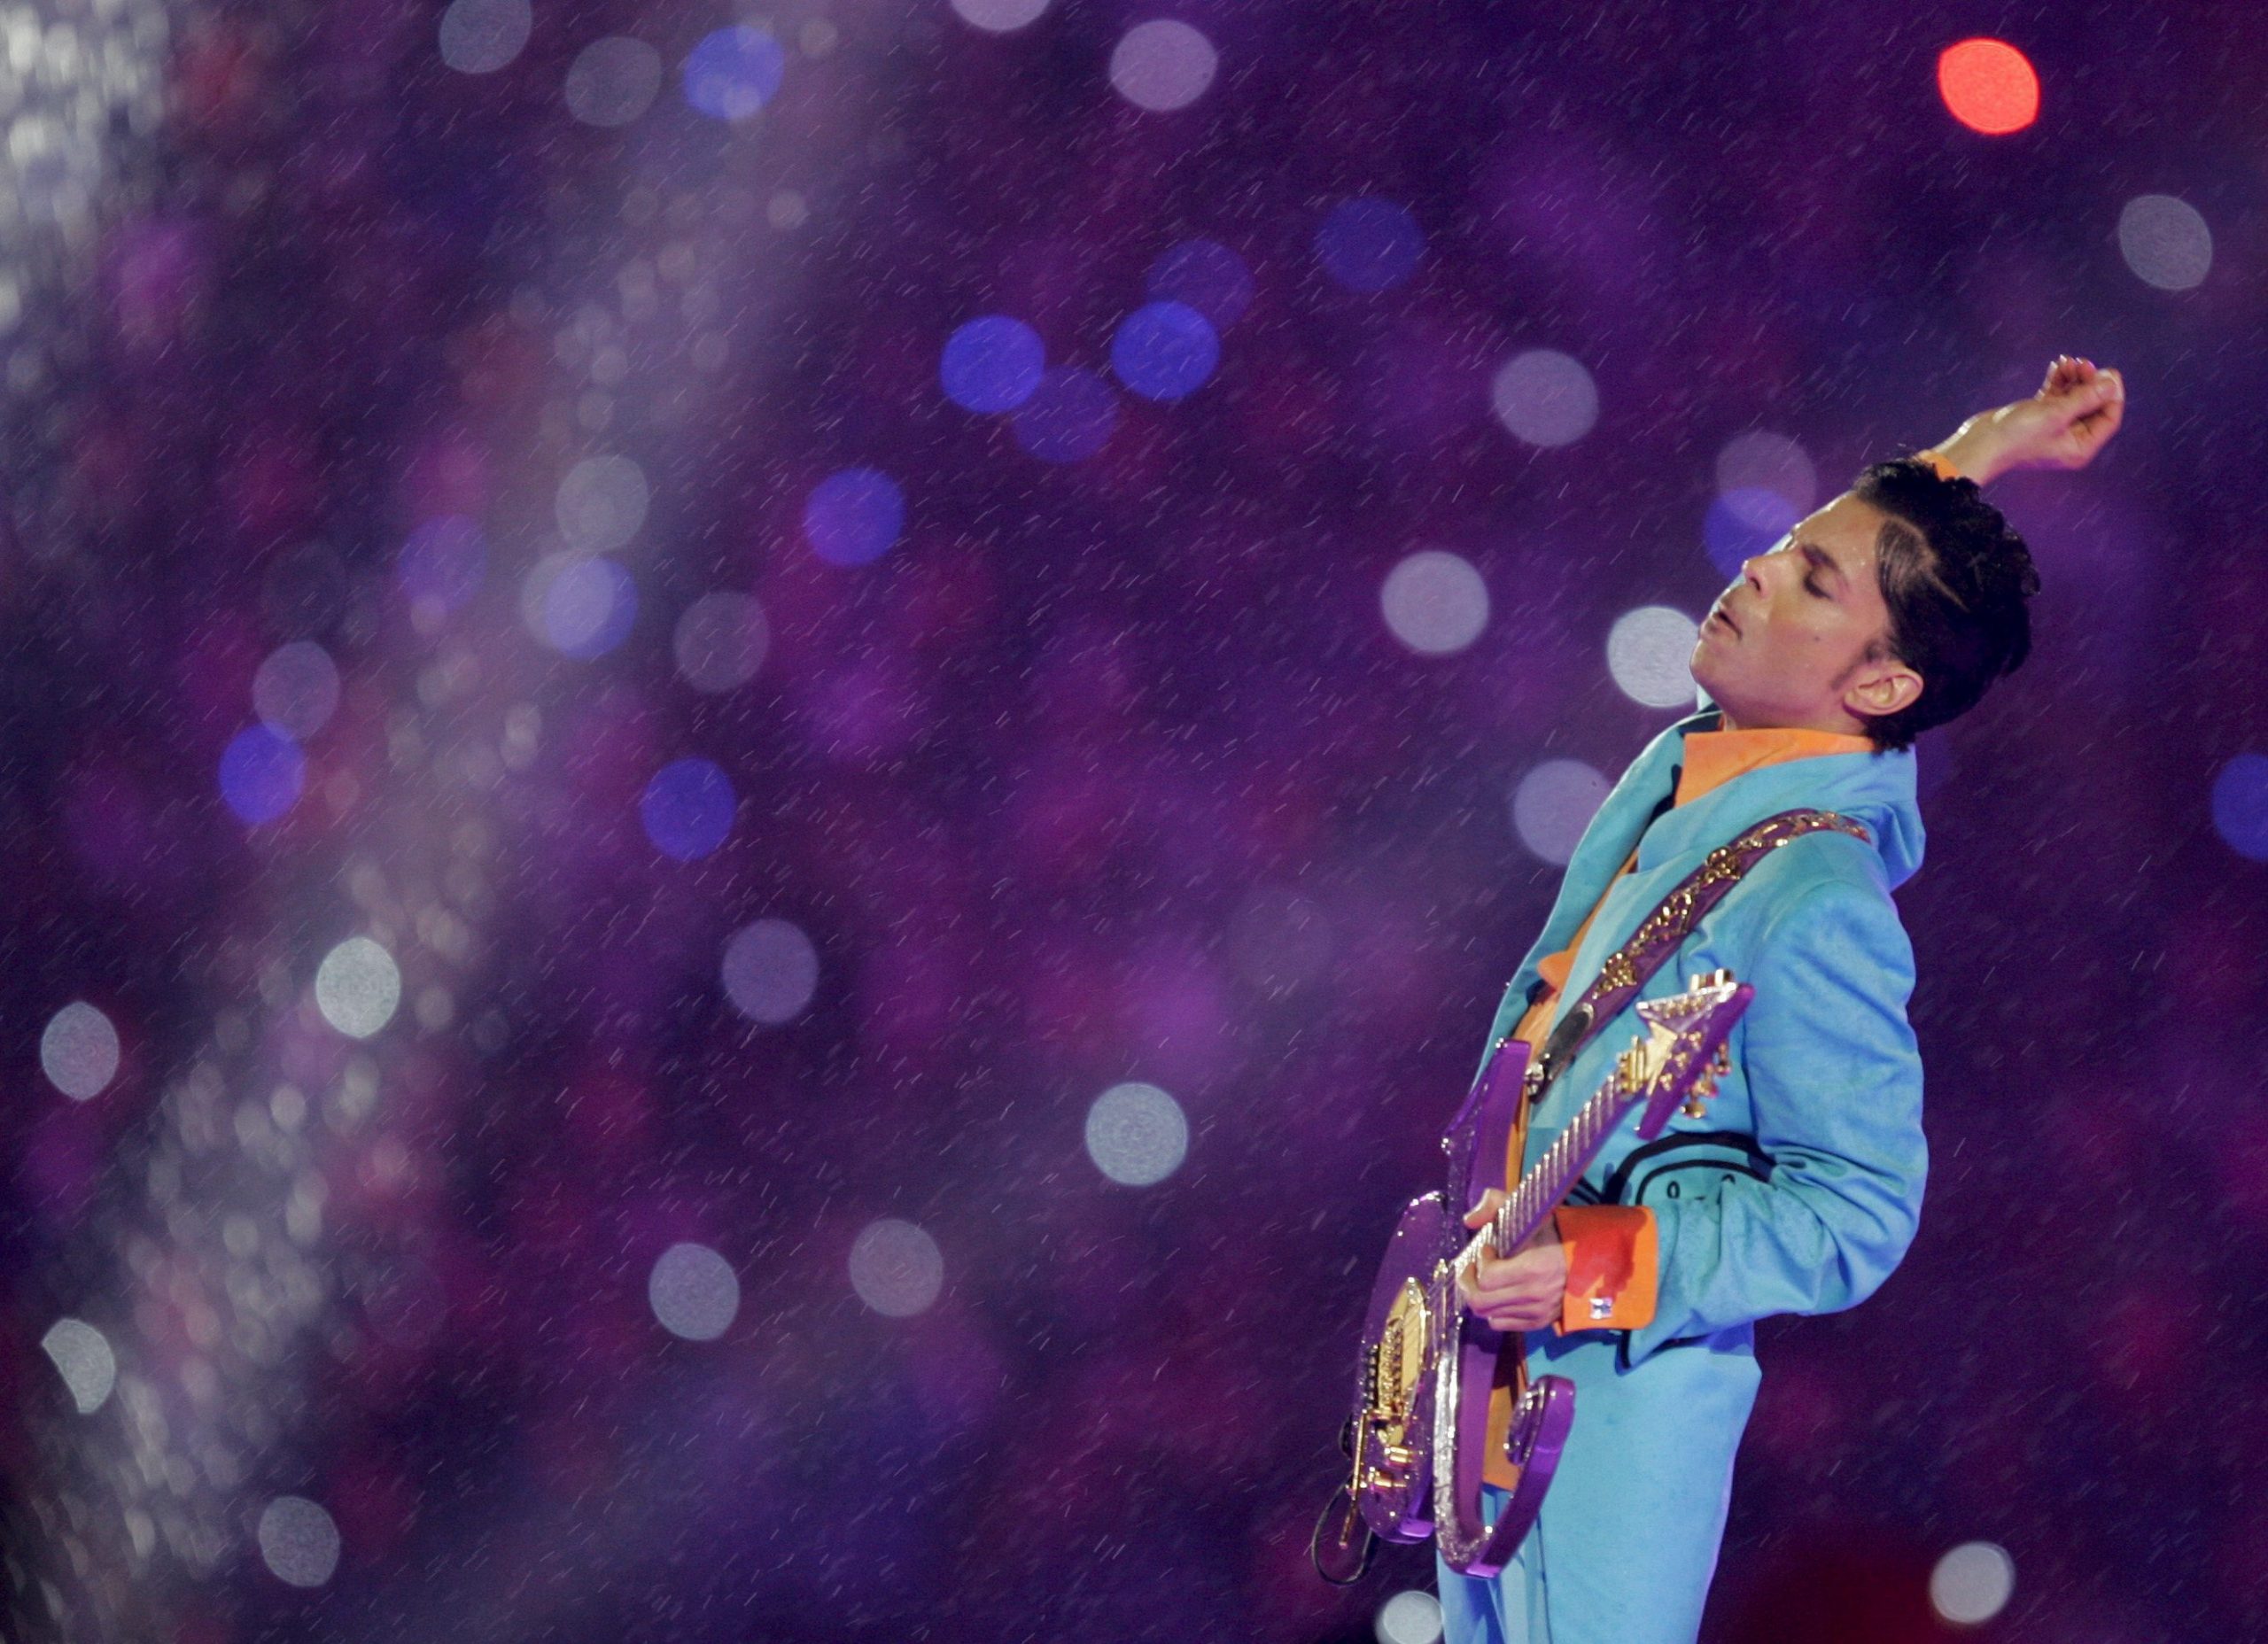 The most iconic Super Bowl halftime looks through the years